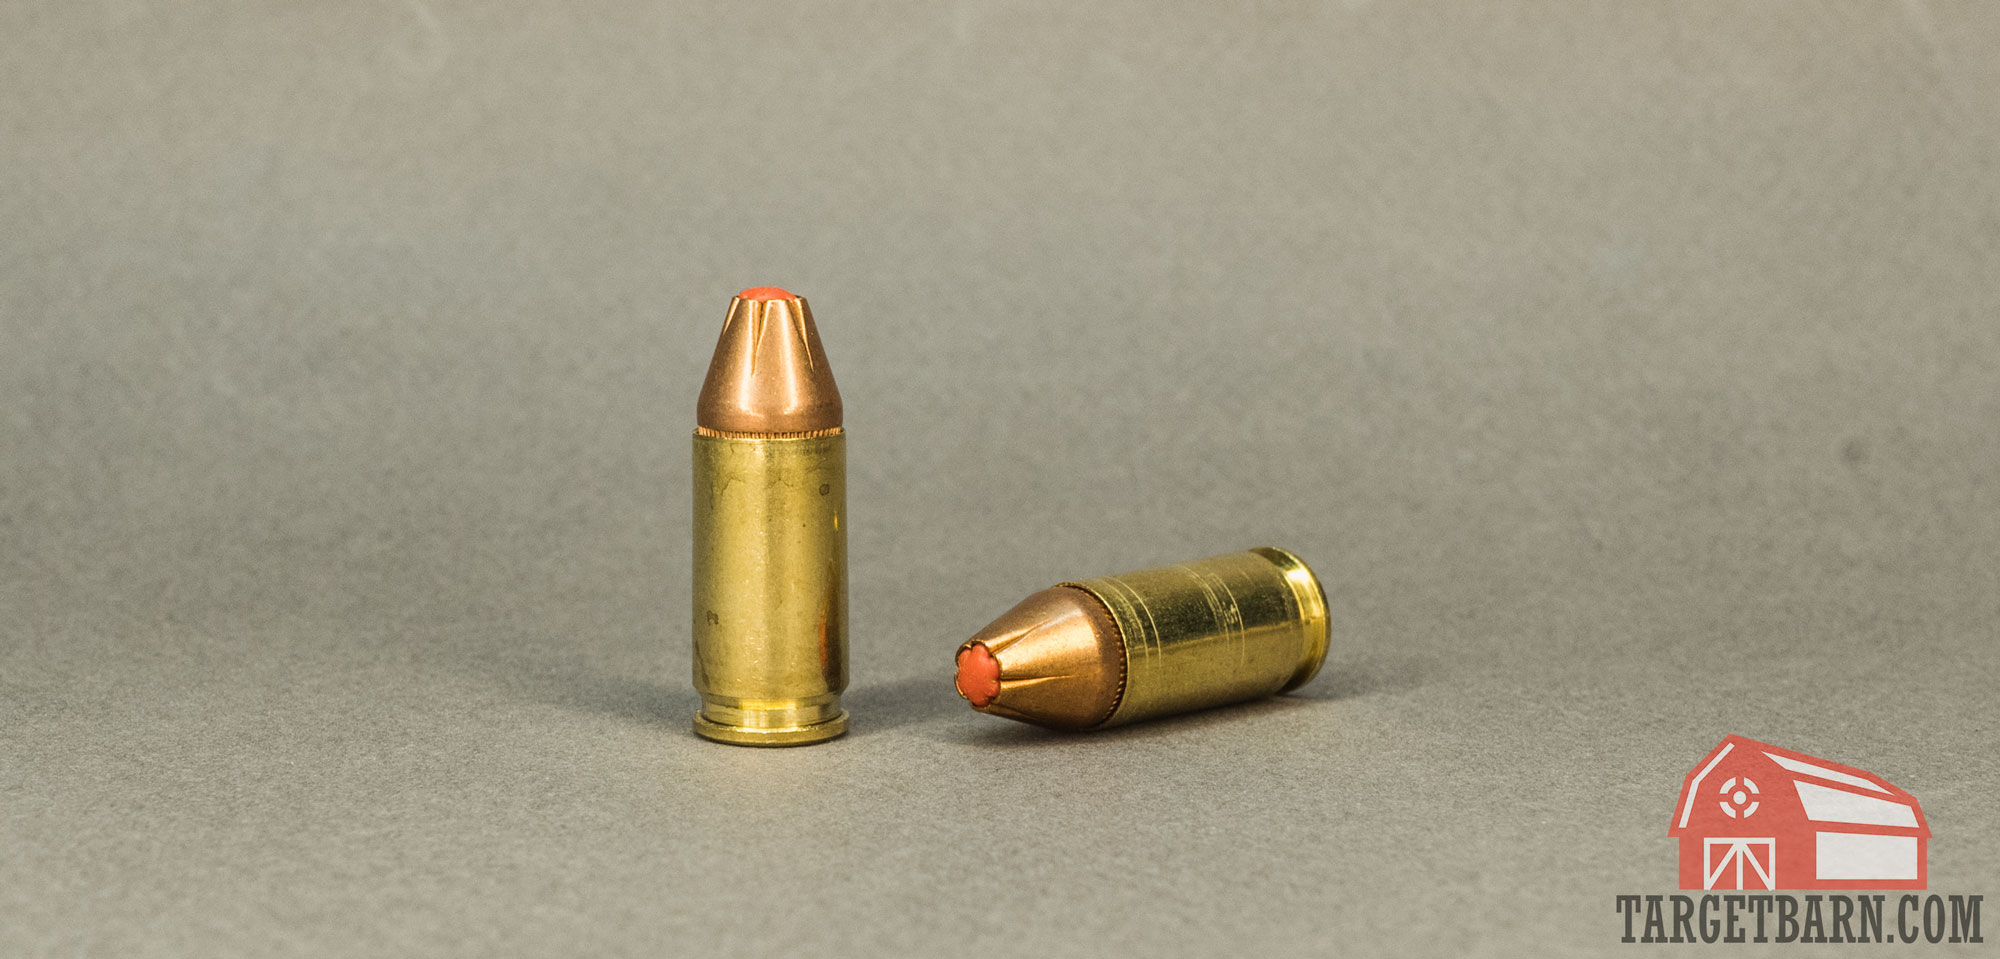 two rounds of hornady critical defense 9mm, one standing and one laying on its side to show the round's red tip